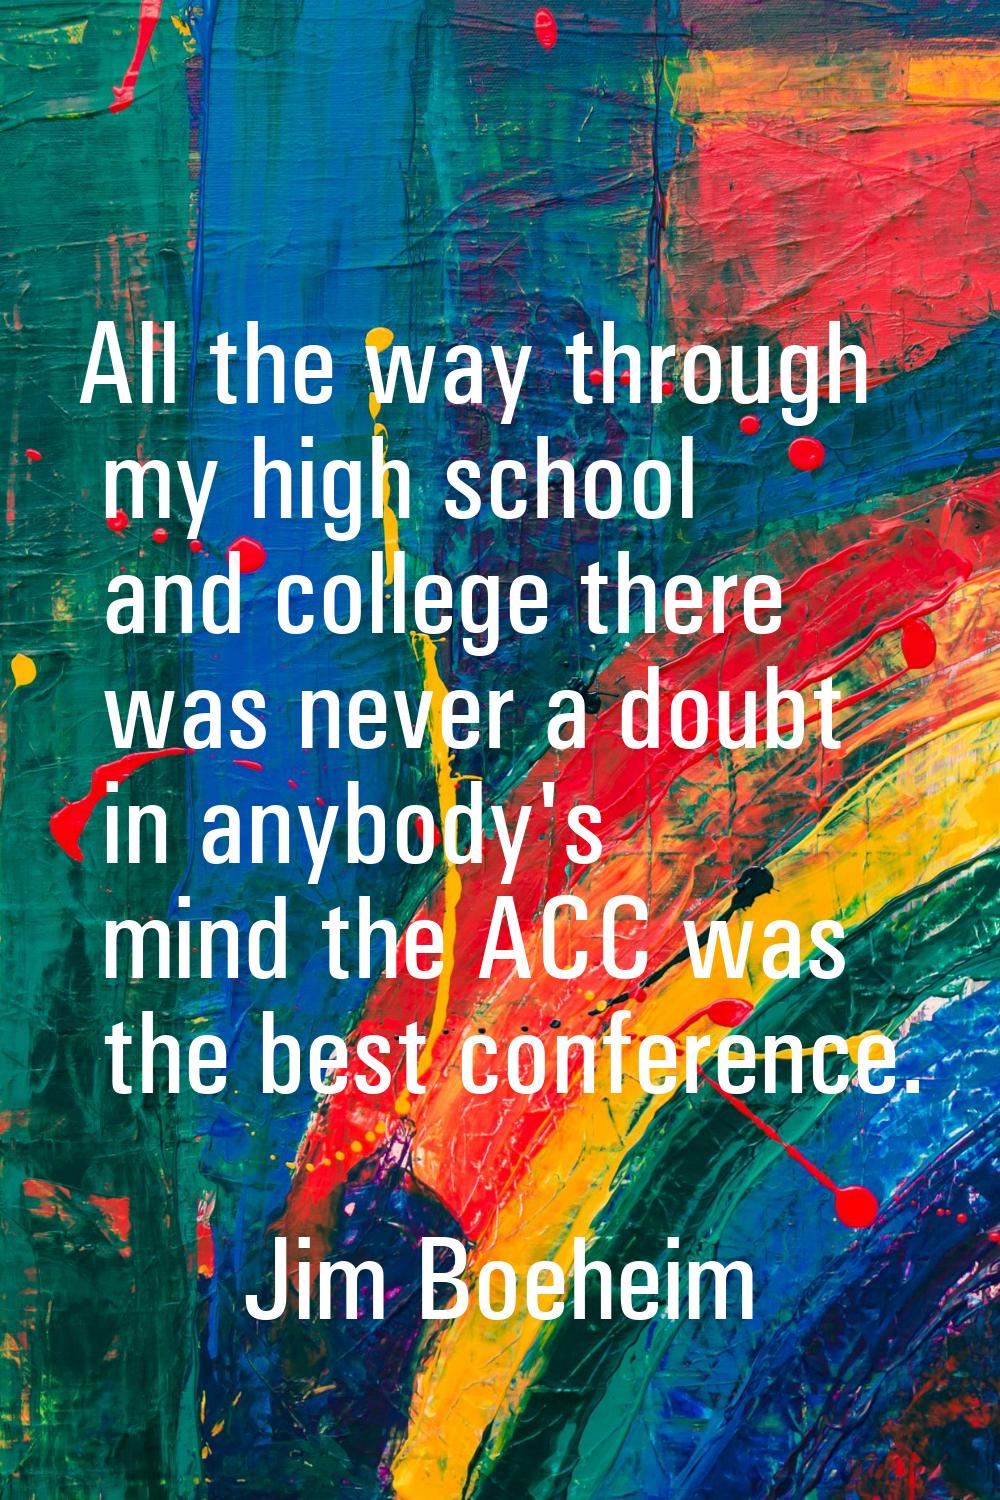 All the way through my high school and college there was never a doubt in anybody's mind the ACC wa